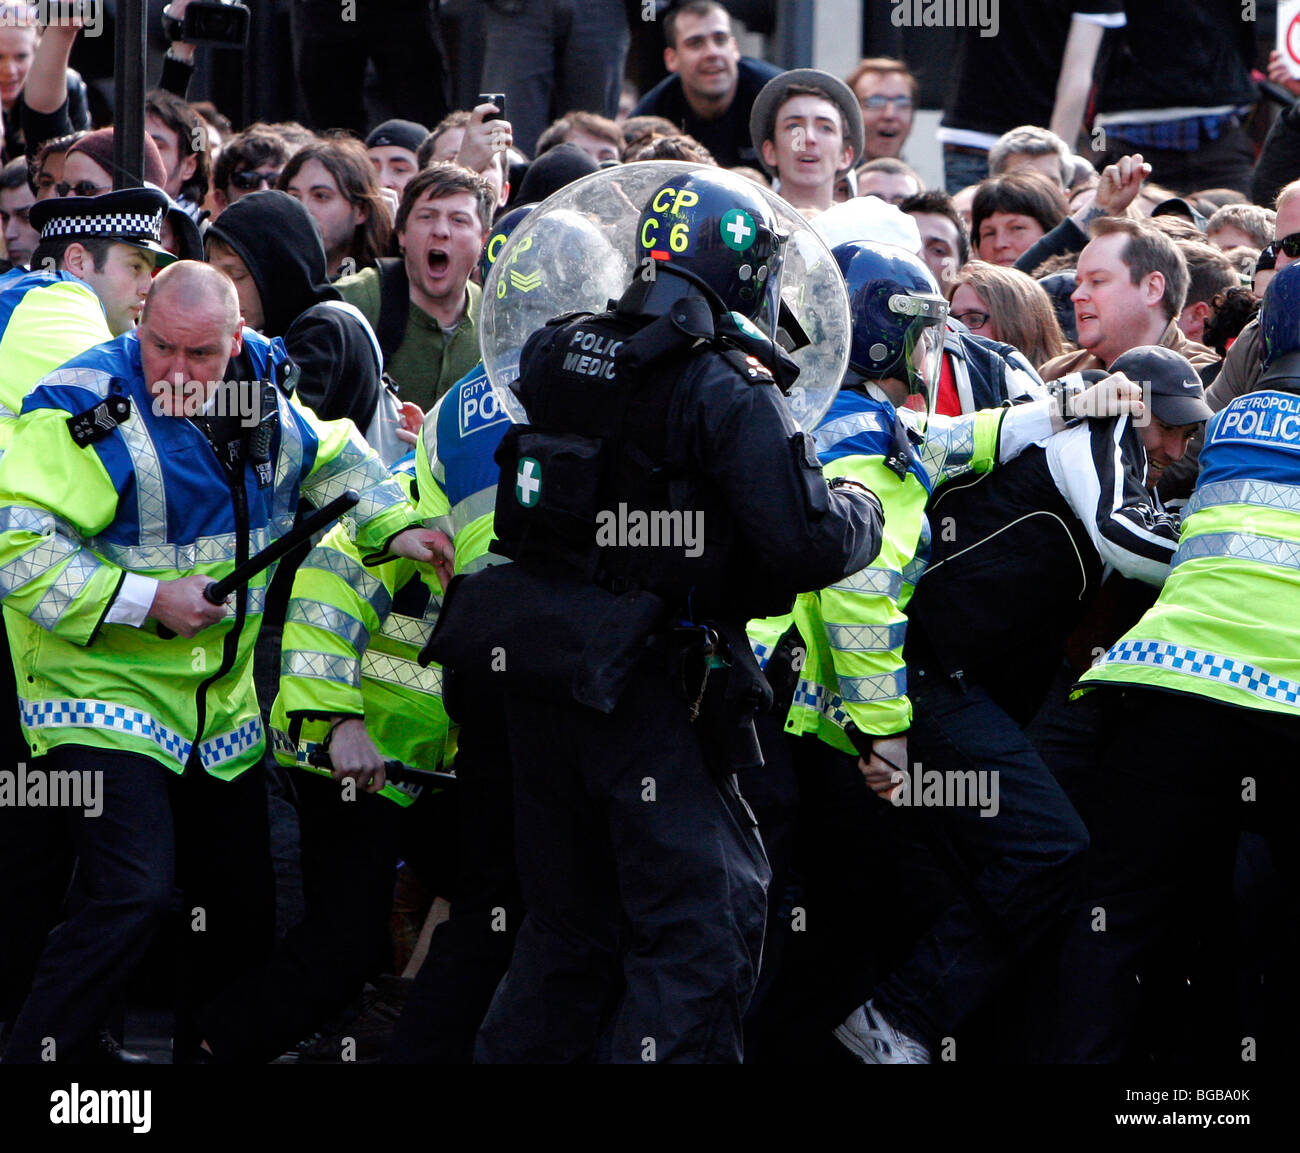 England, London, City, Threadneedle Street, Bank of England G20 Protests, April 2009. Police clash with protesters. Stock Photo